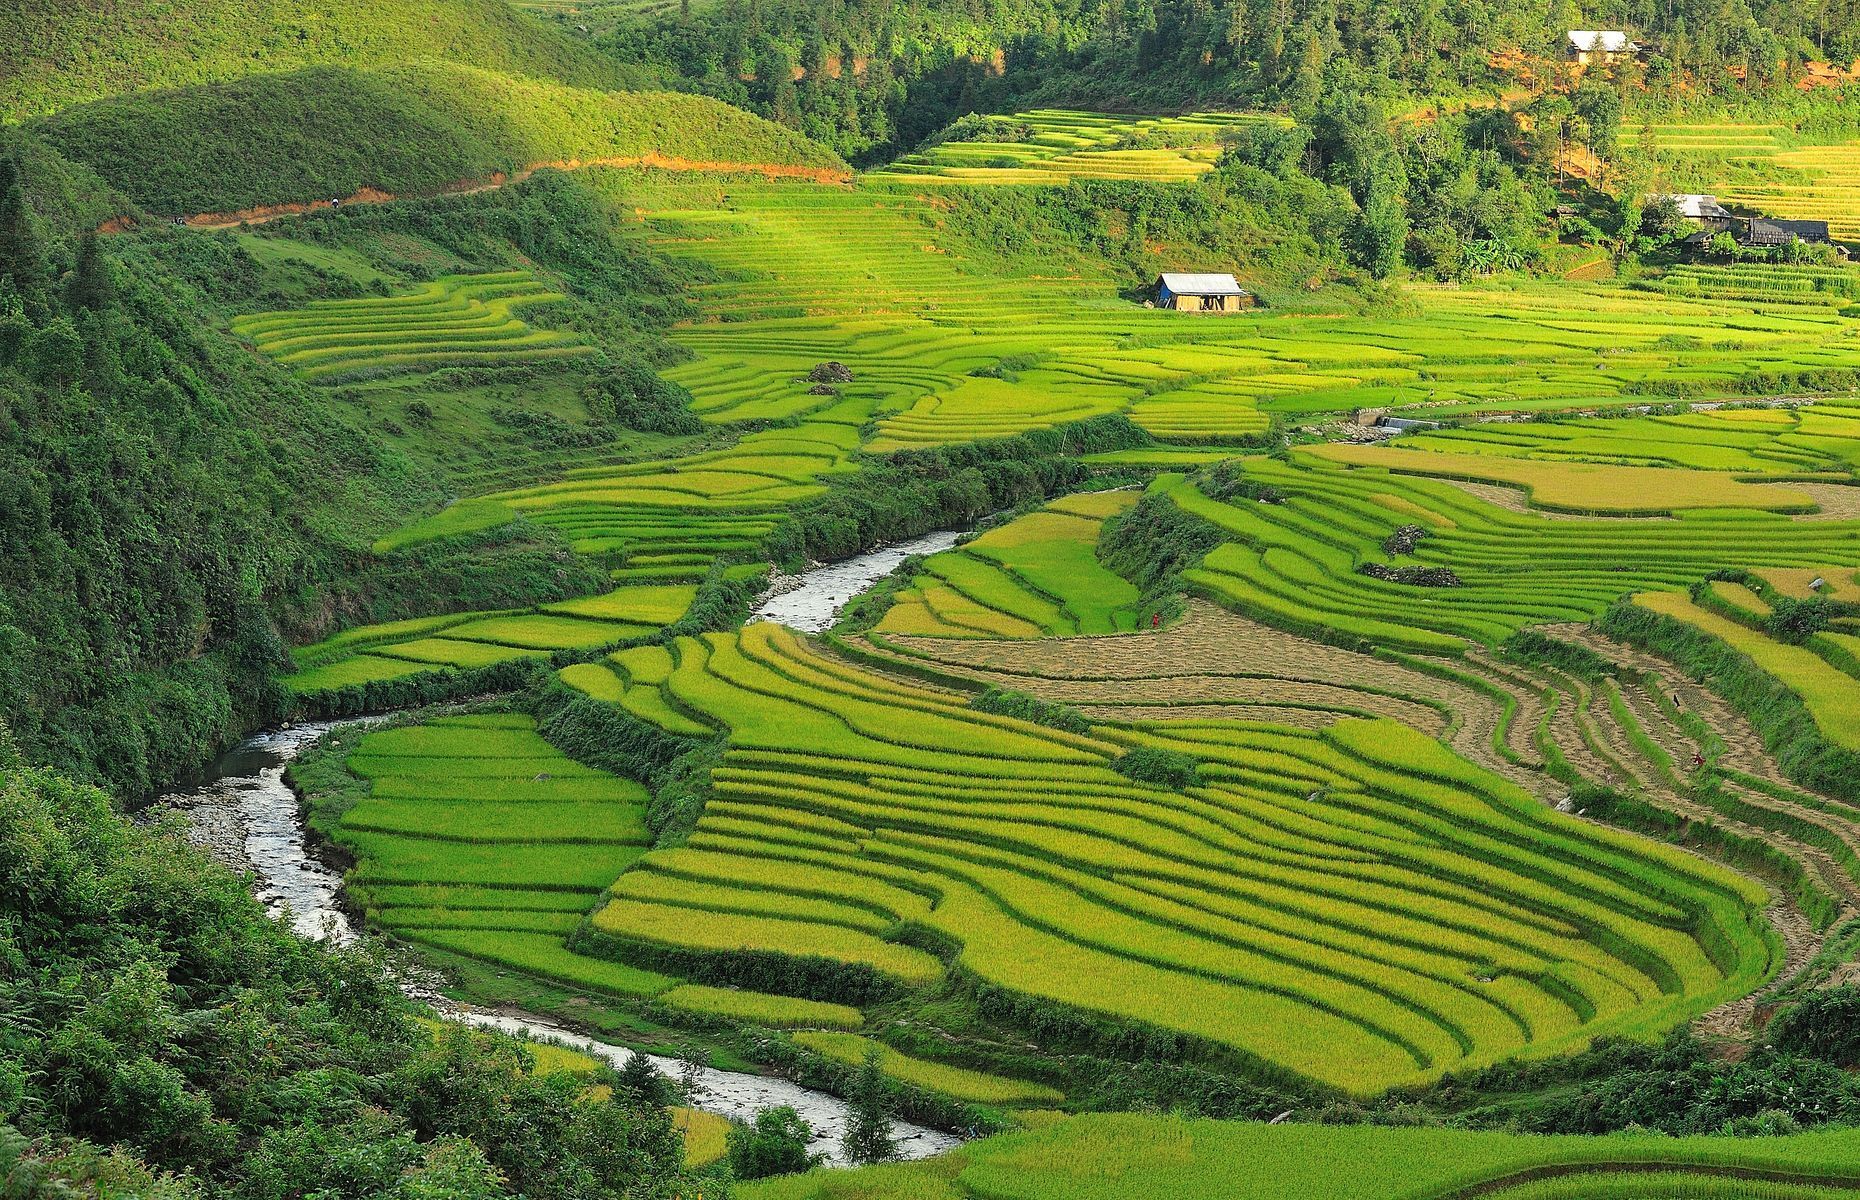 Nestled in the mountains of northwestern Vietnam, <a href="https://vietnam.travel/places-to-go/northern-vietnam/sapa" rel="noreferrer noopener">Sapa</a> is an extraordinary destination sure to charm with its astonishingly beautiful landscapes. Particularly impressive in September and October, verdant rice paddies stretch as far as the eye can see. Hiking enthusiasts can also explore the peaks of the Hoang Lien Son mountain range, including the country’s highest, <a href="https://vietnam.travel/things-to-do/why-fansipan-must-do-sapa" rel="noreferrer noopener">Mount Fansipan</a>.